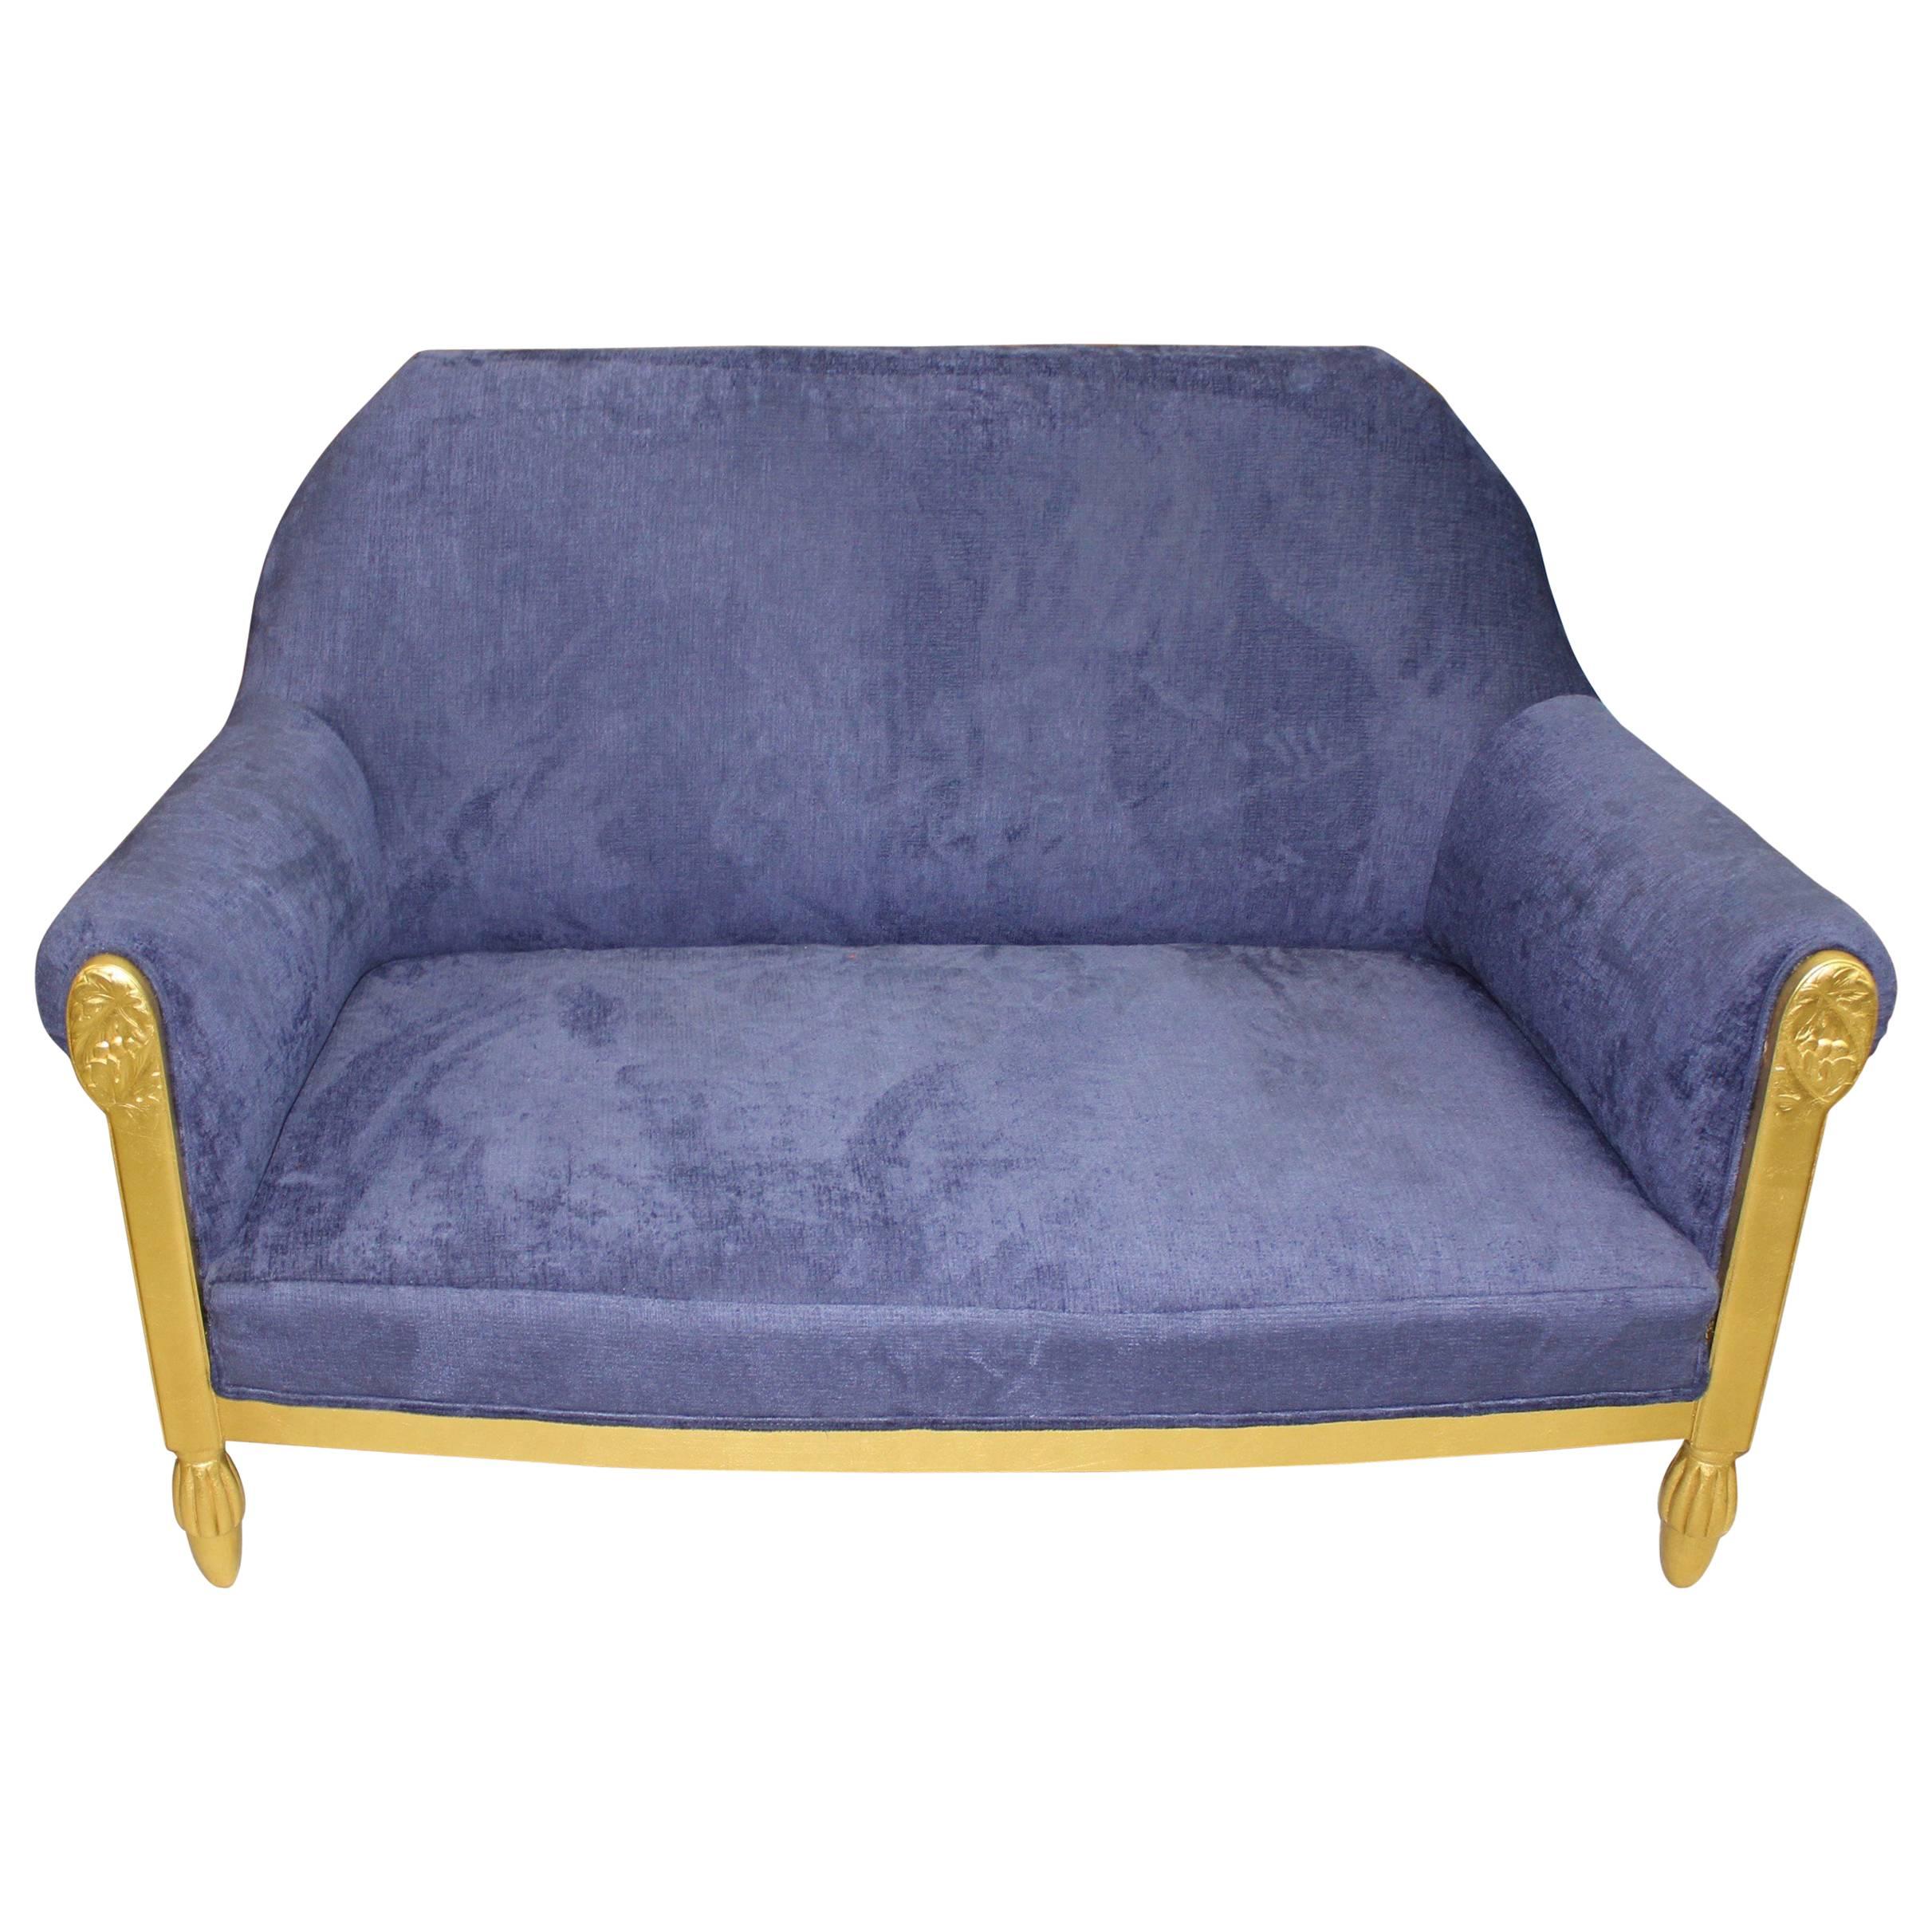 Exceptional French Art Deco Settee Giltwood by Paul Follot, circa 1920s For Sale